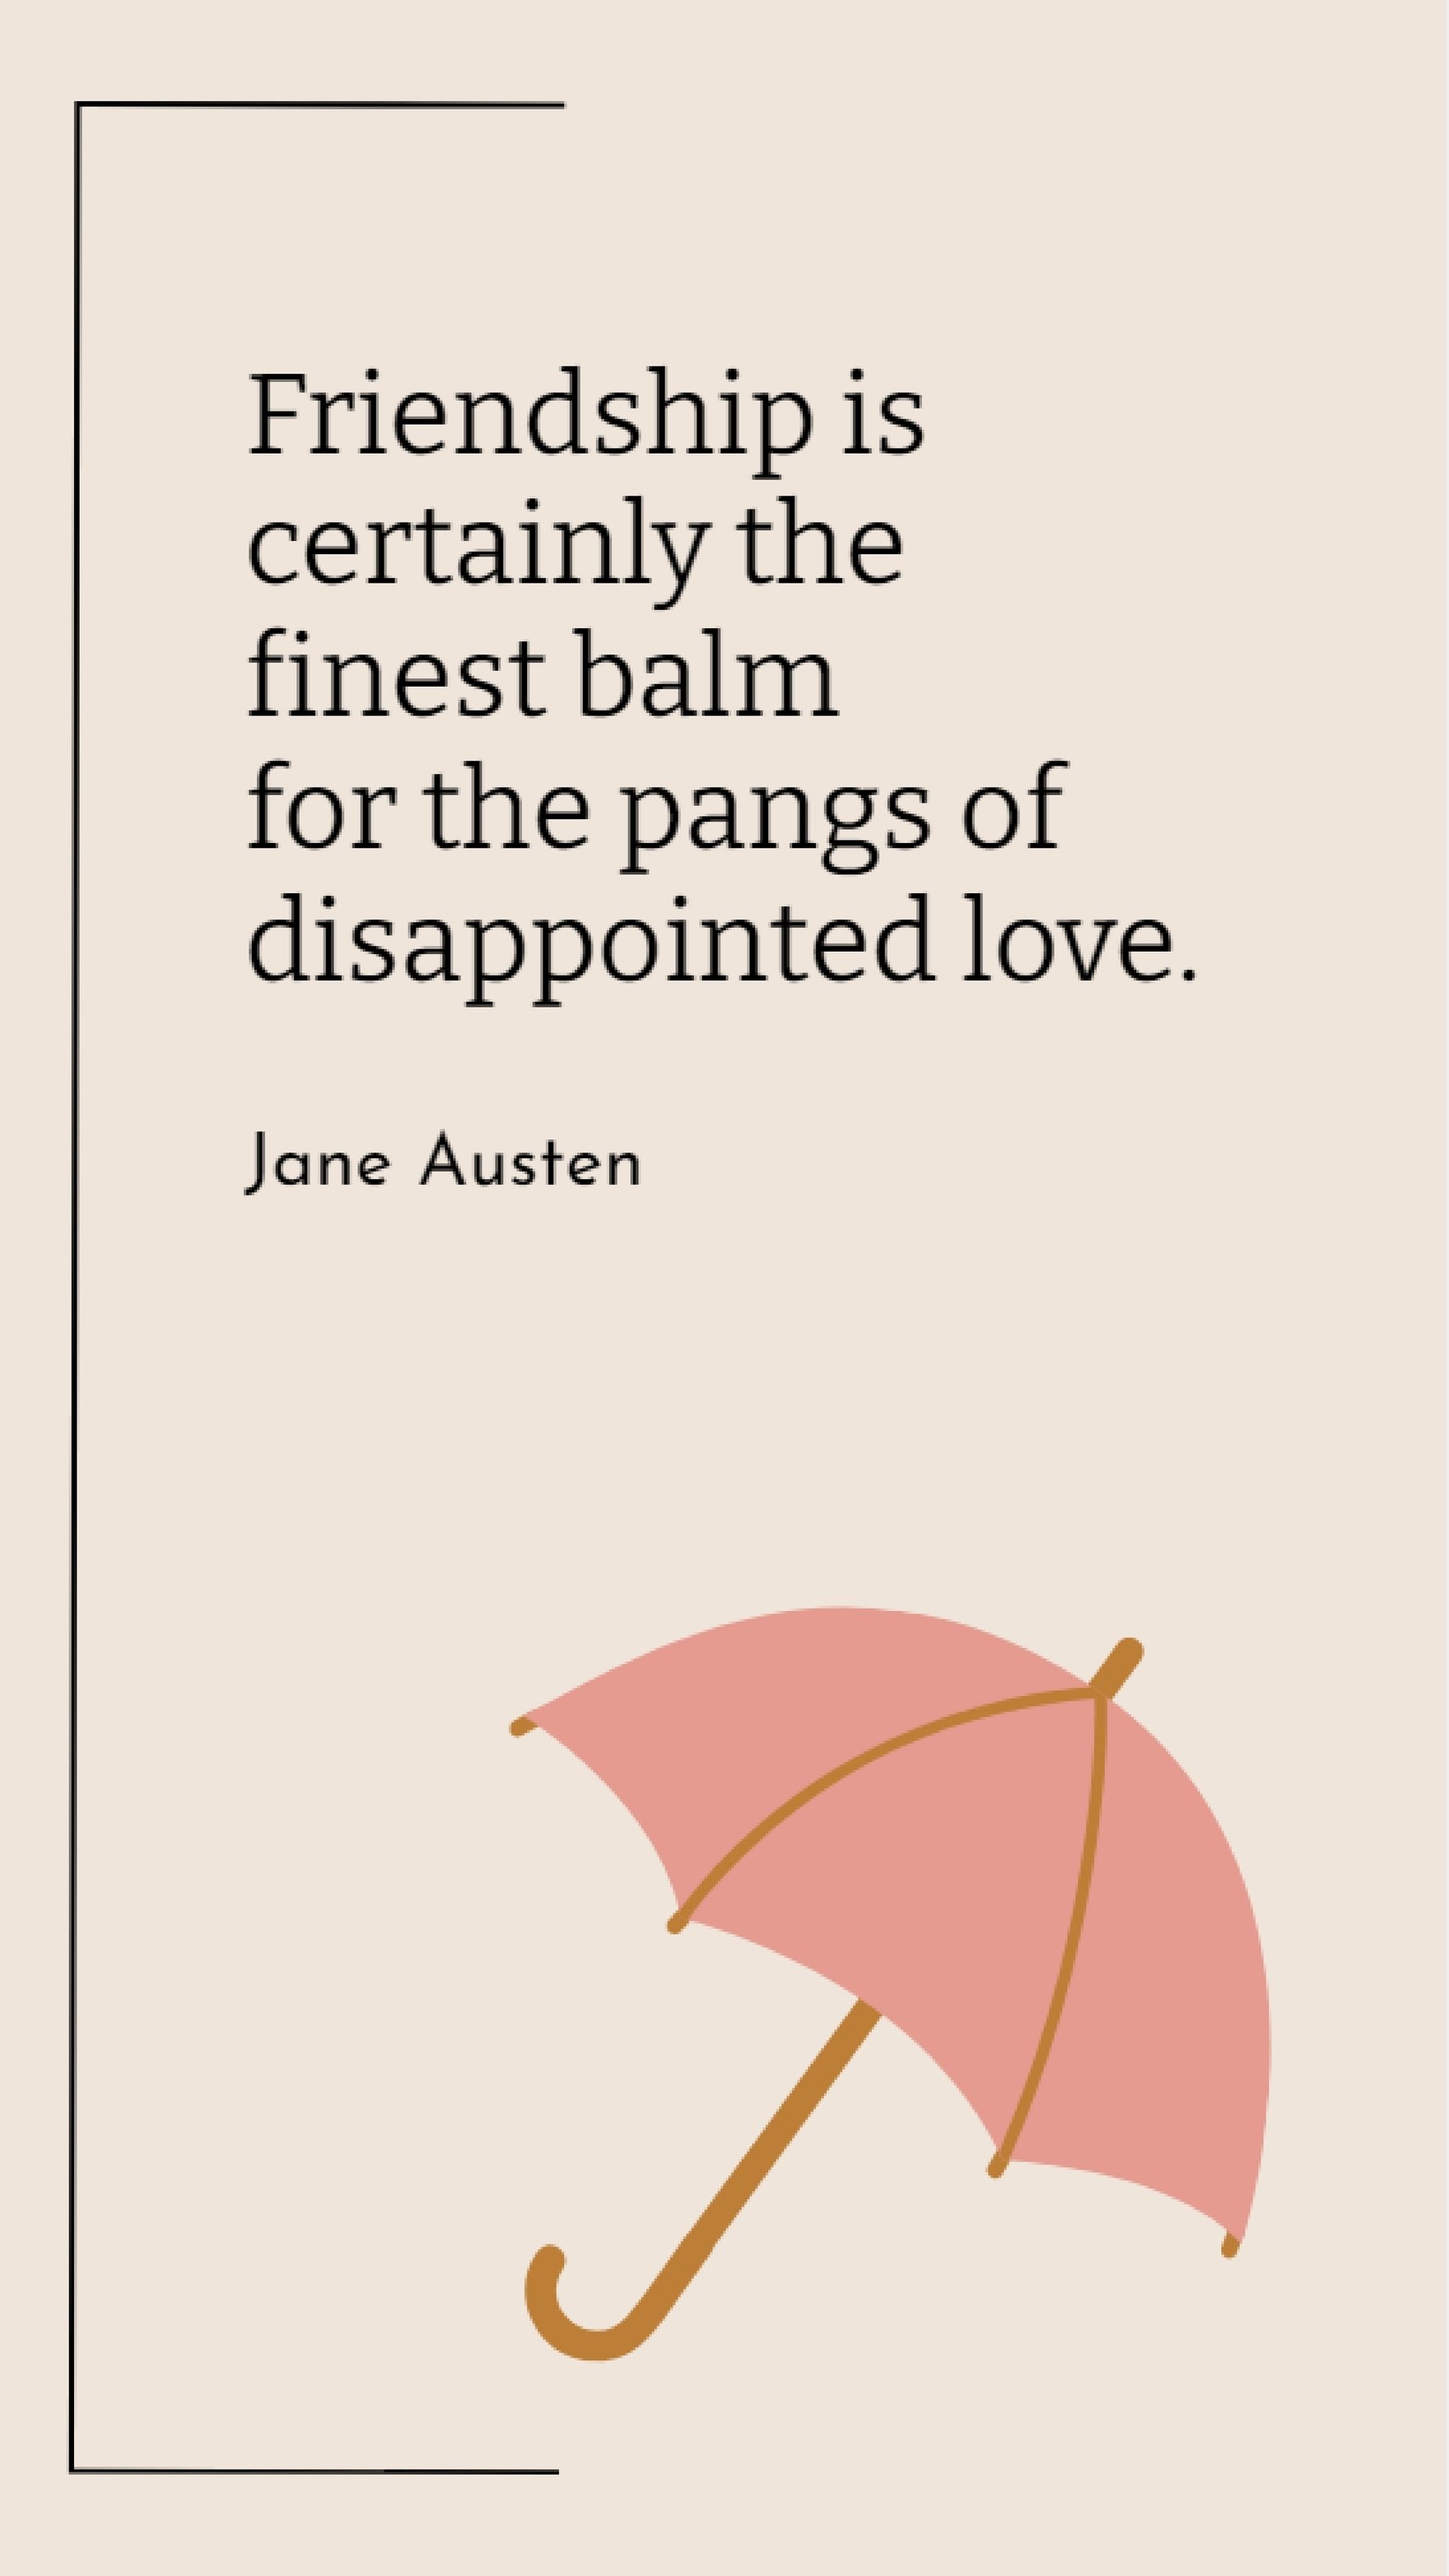 Jane Austen - Friendship is certainly the finest balm for the pangs of disappointed love. Template